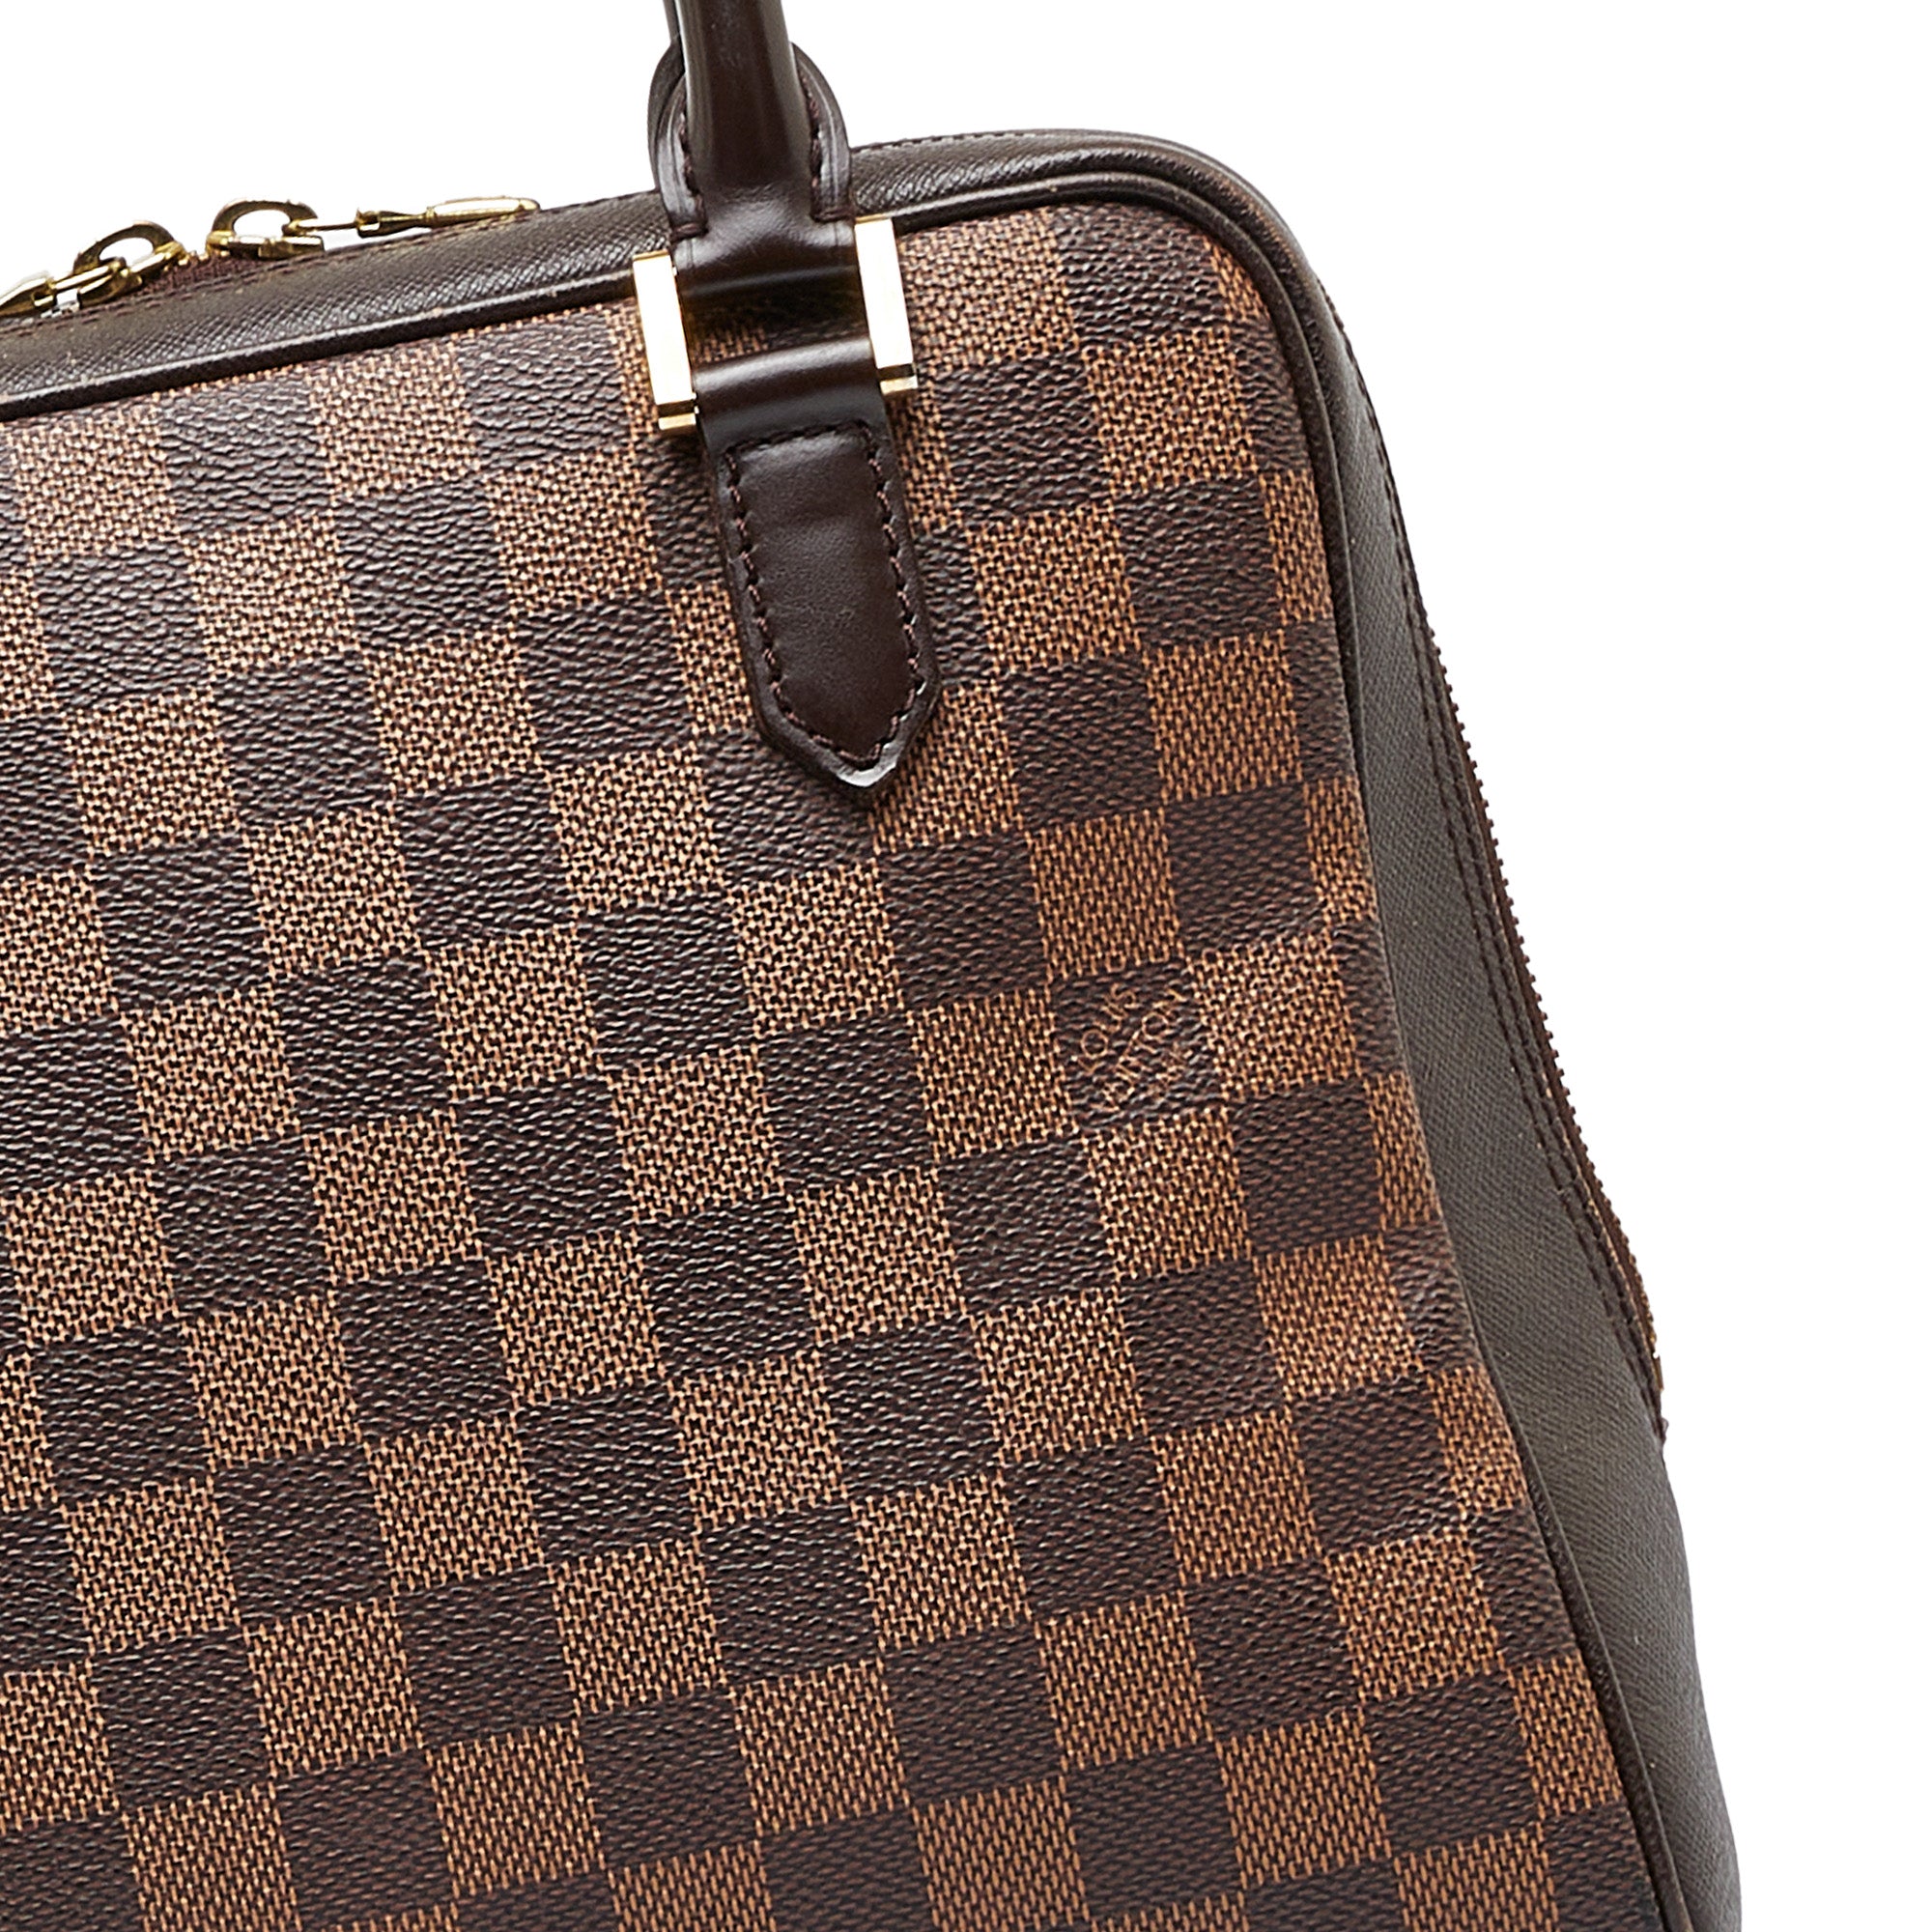 POWERED BY BUSINESS.Louis Vuitton Damier Triana